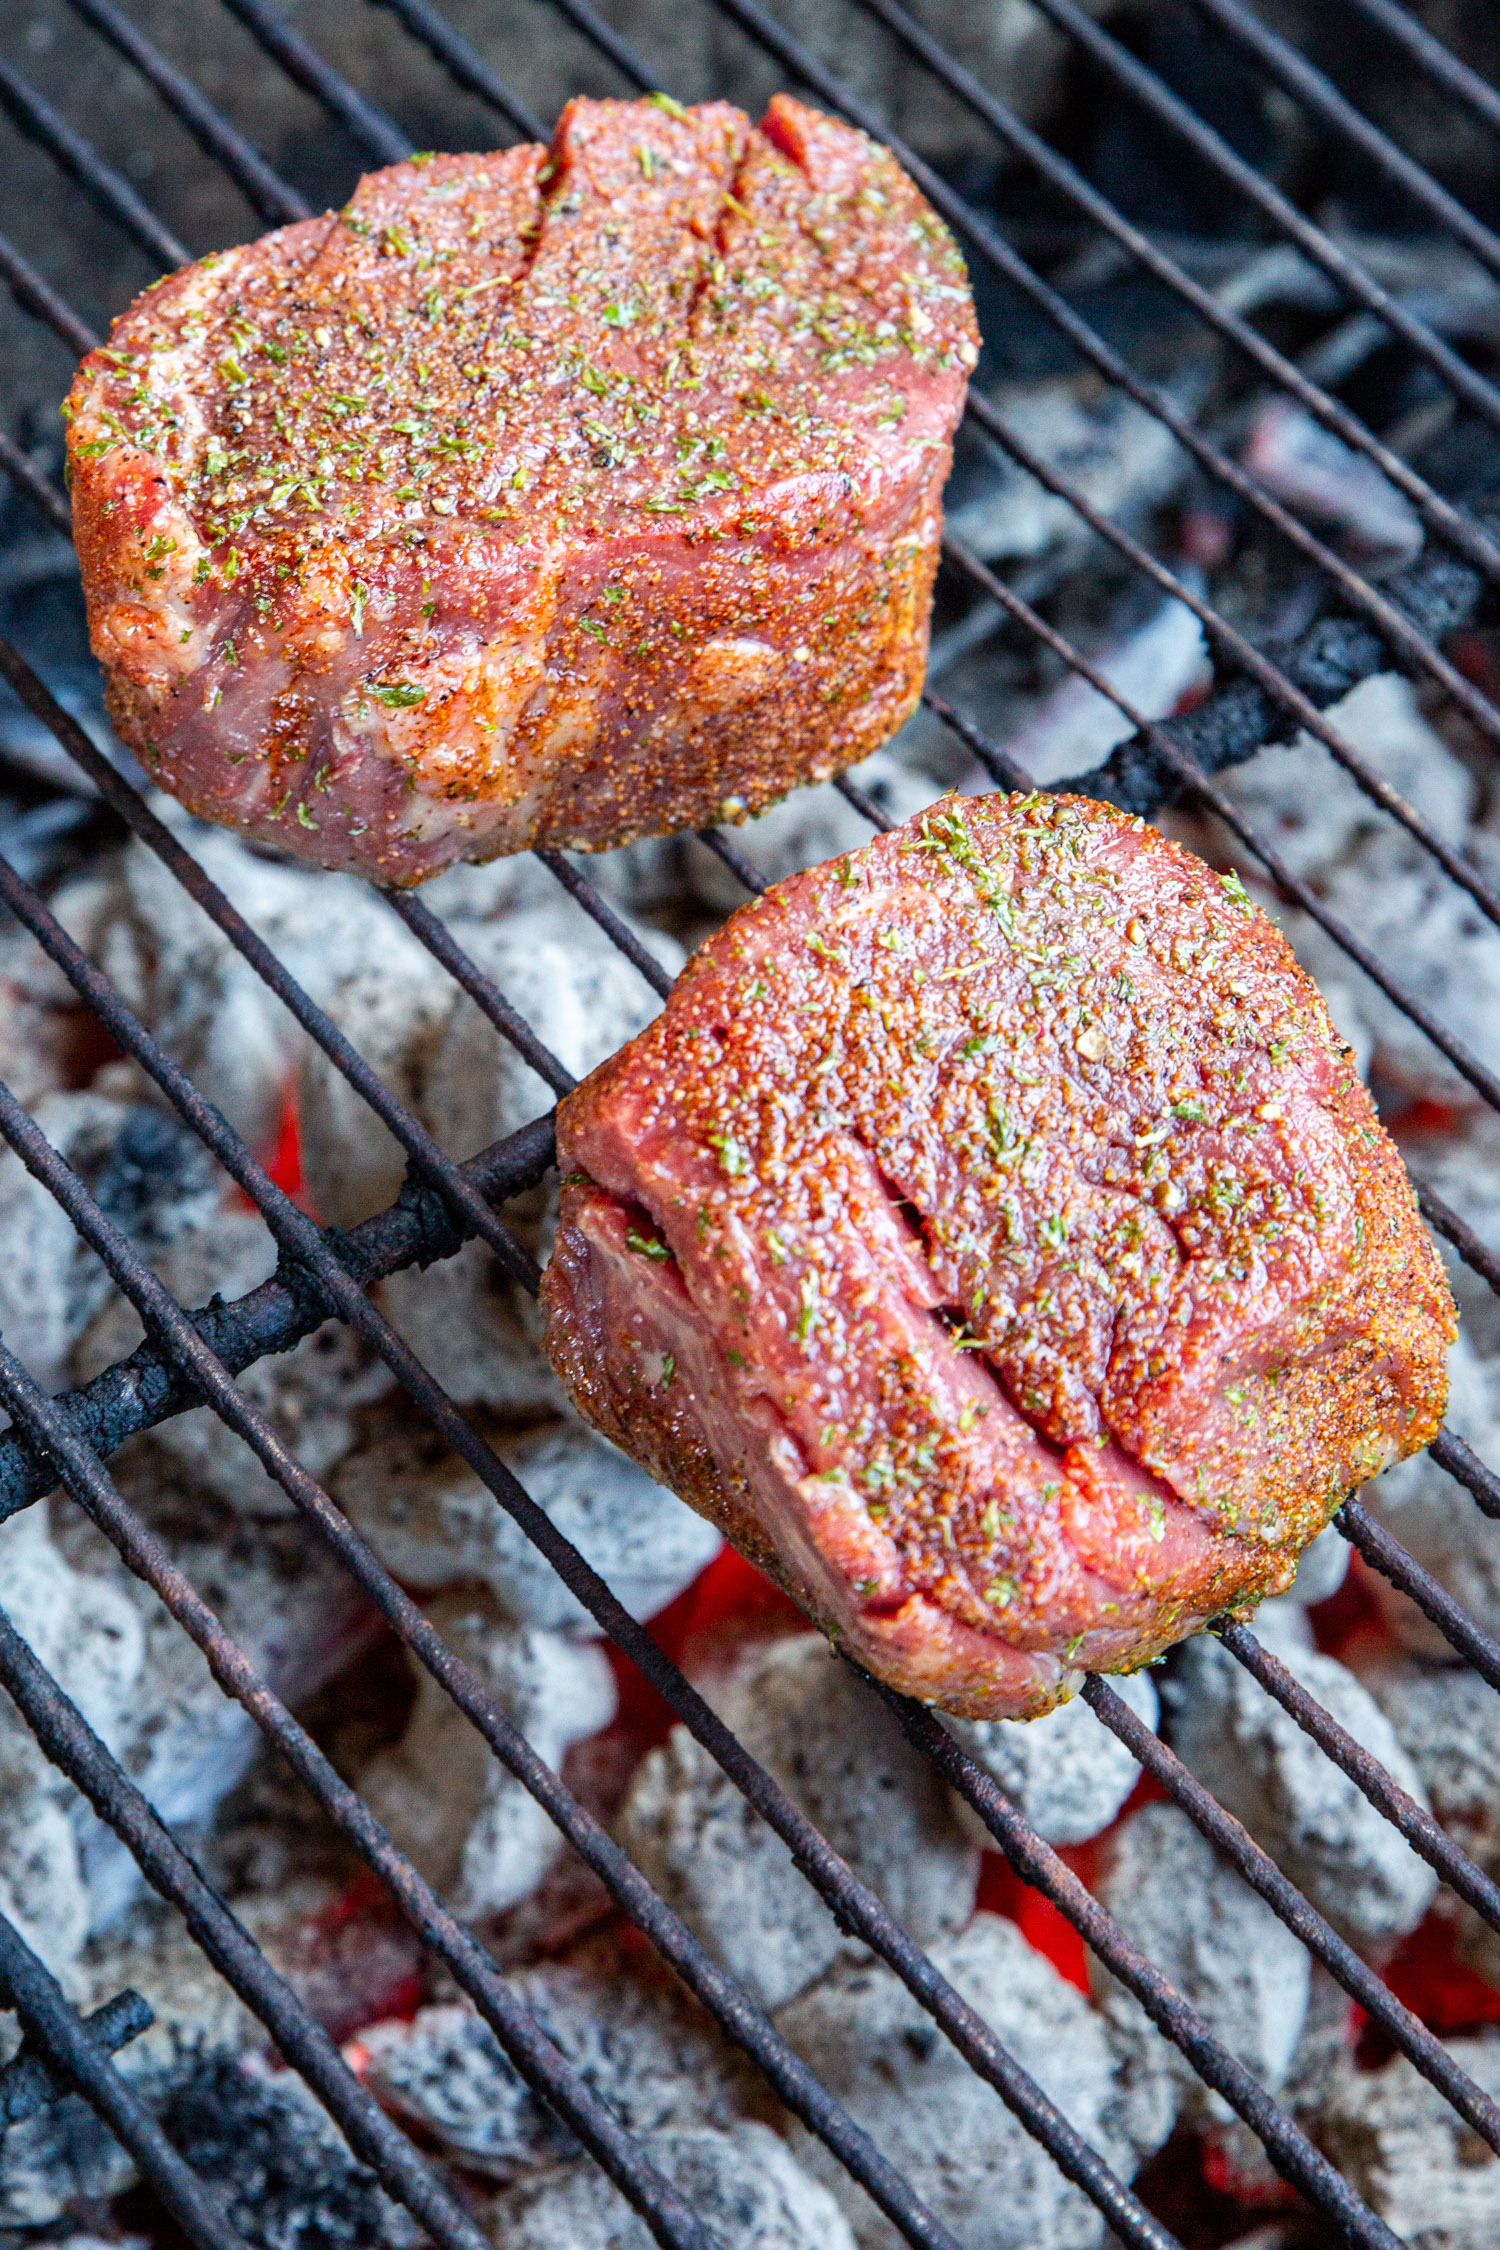 filet mignon steaks on a charcoal grill is one of the most delicious cuts of beef